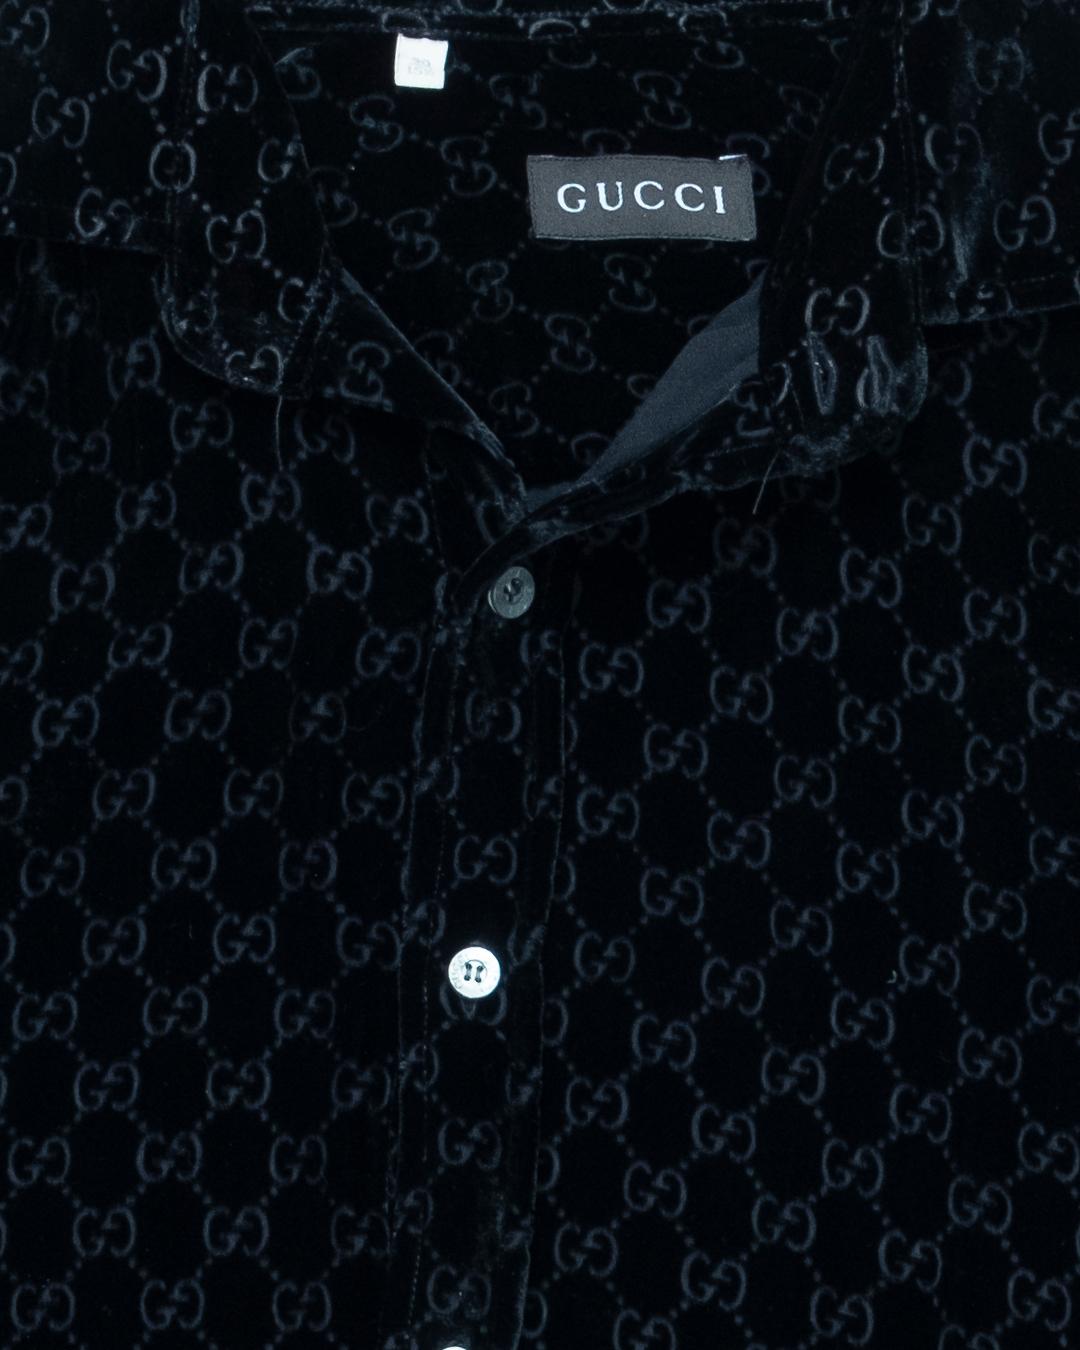 Gucci by Tom Ford AW1997 Oversized Velvet Monogrammed Button-Up 1